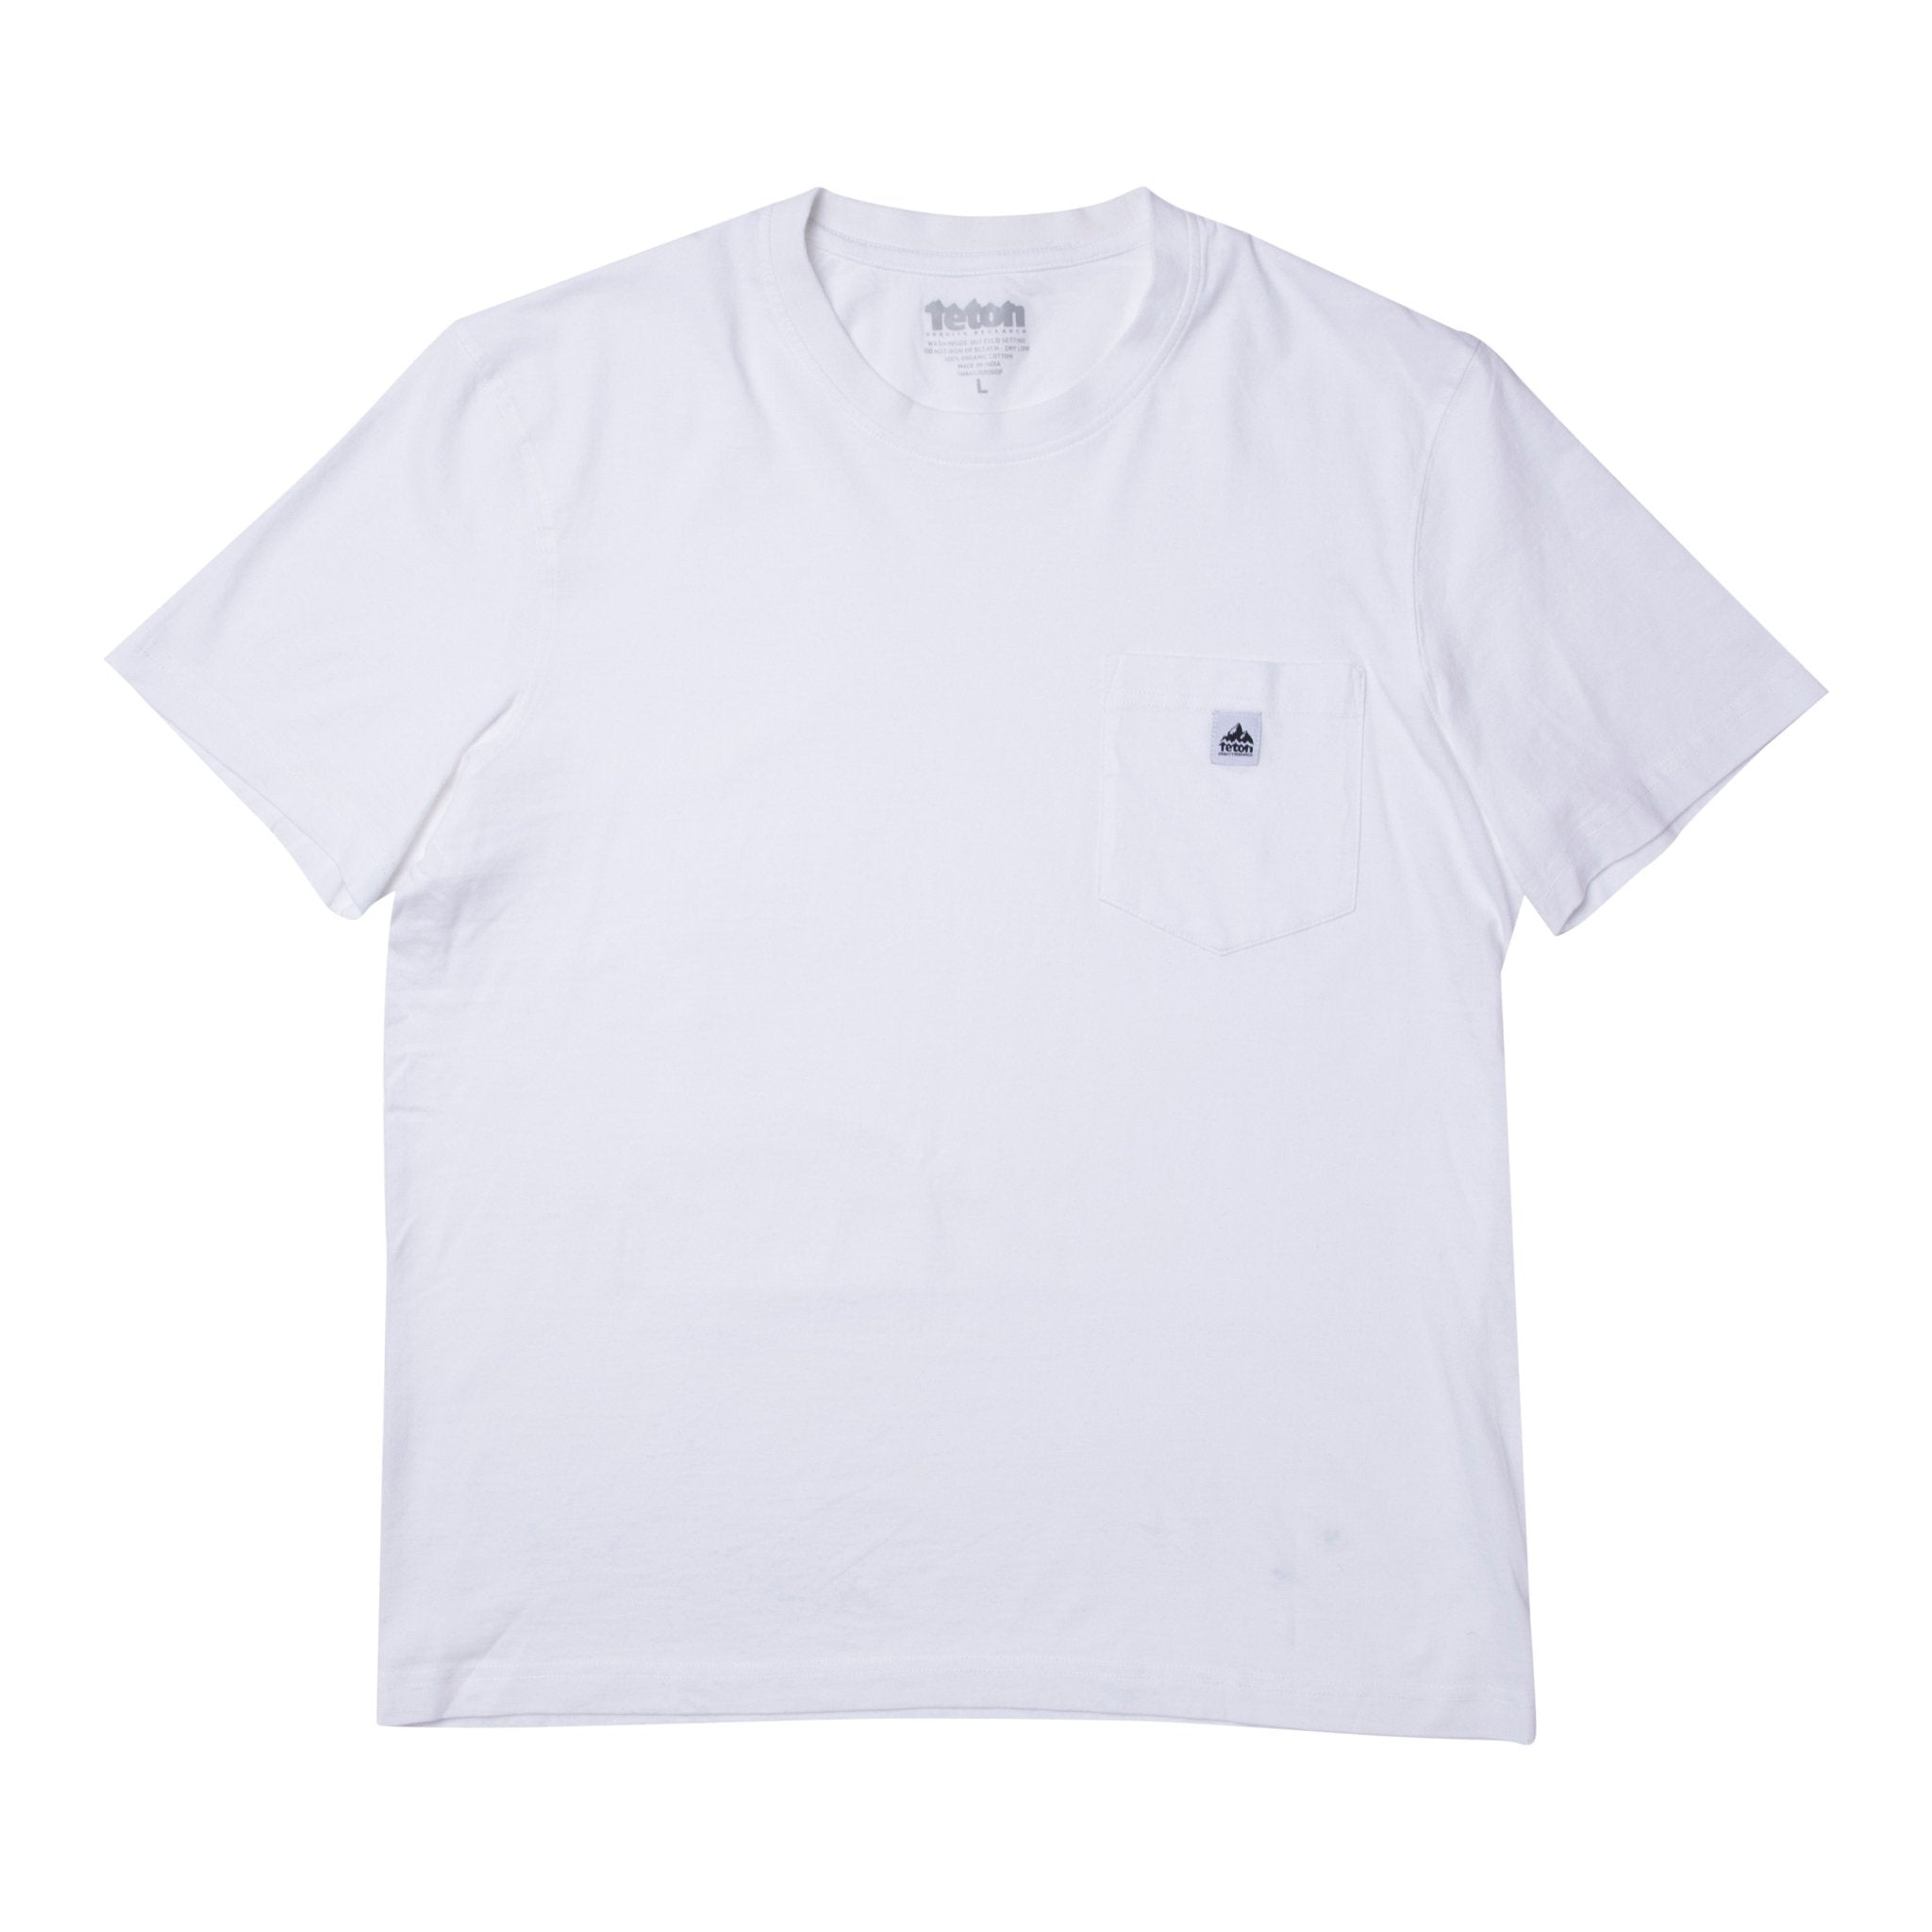 Luca Organic Cotton Pocket Tee - IN STORE ONLY - Teton Gravity Research